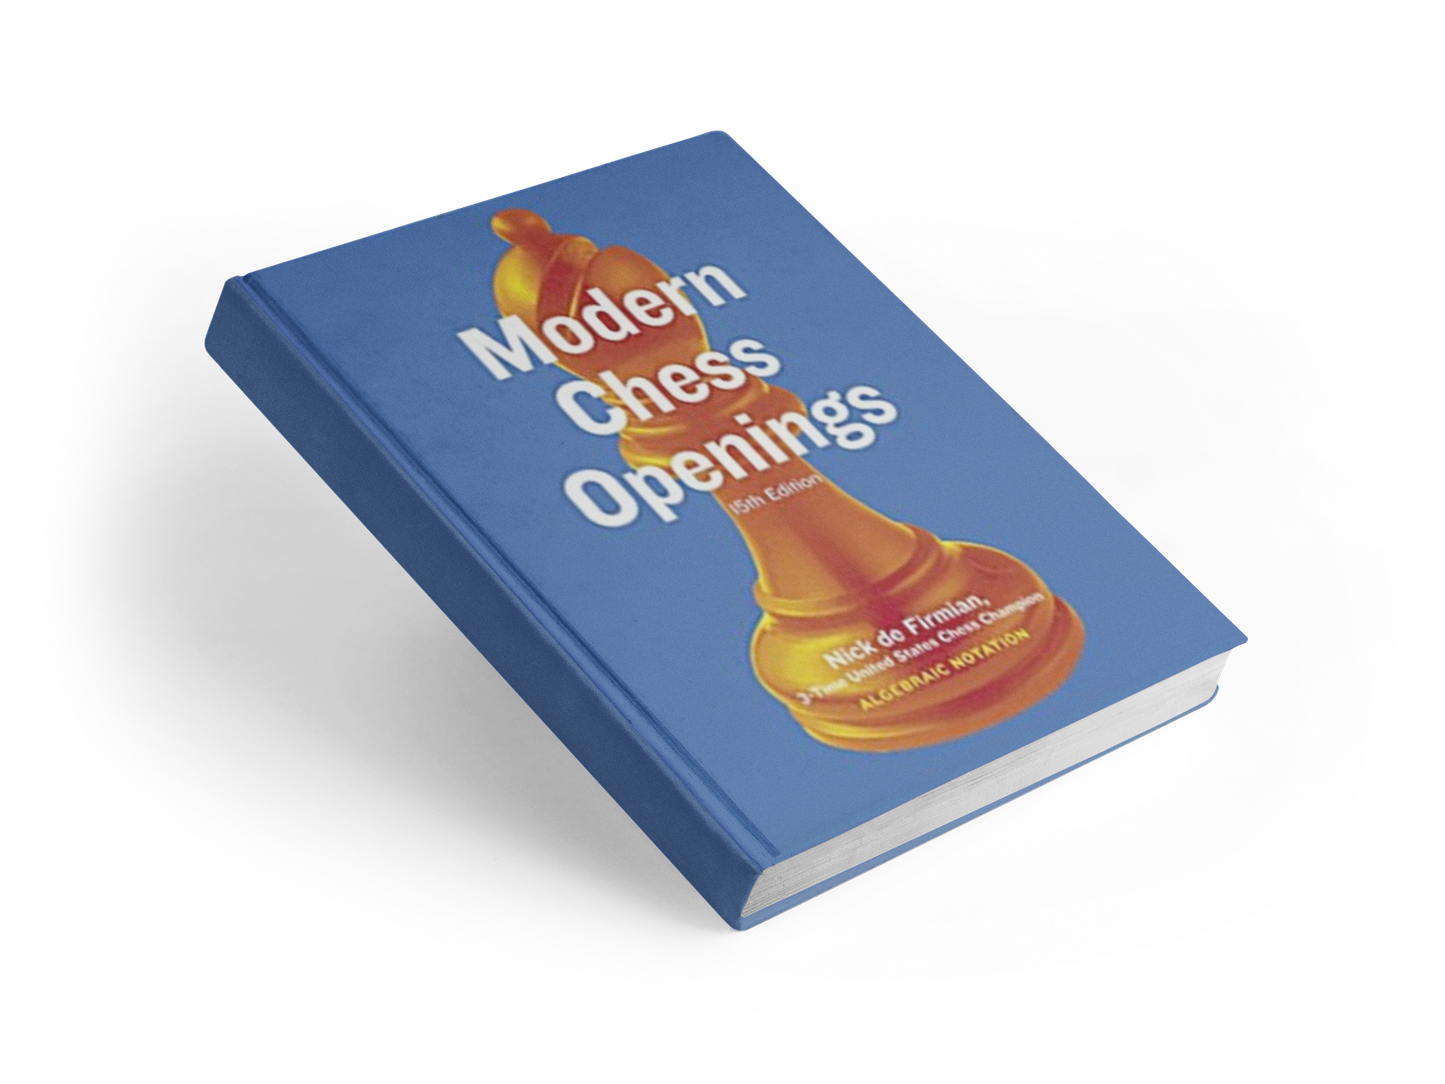 Blue Modern Chess Openings book chess set, Olympia Le-Tan